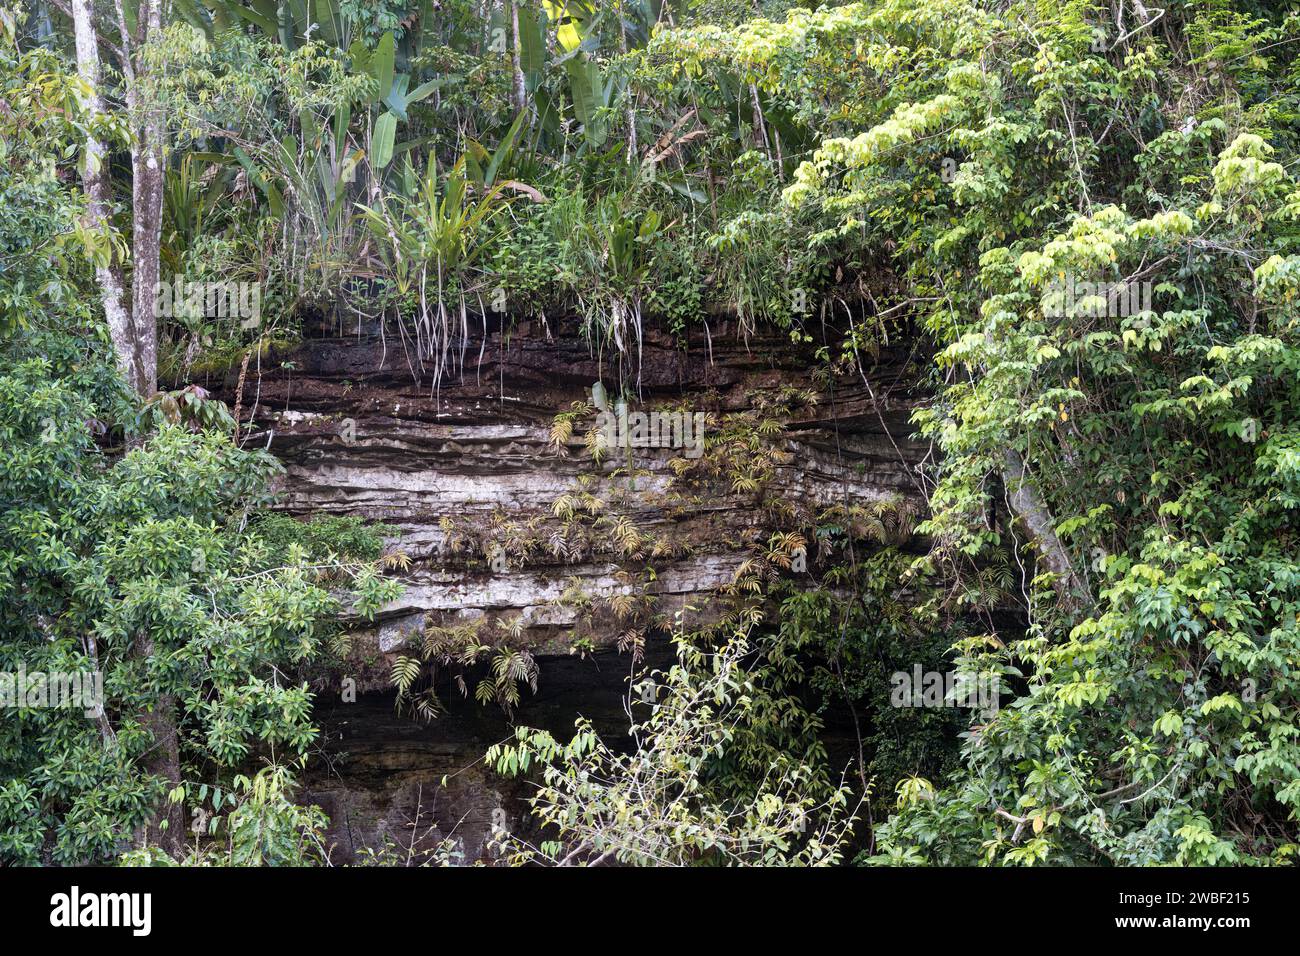 Rock formation along the Trombetas river, Para state, Brazil Stock Photo